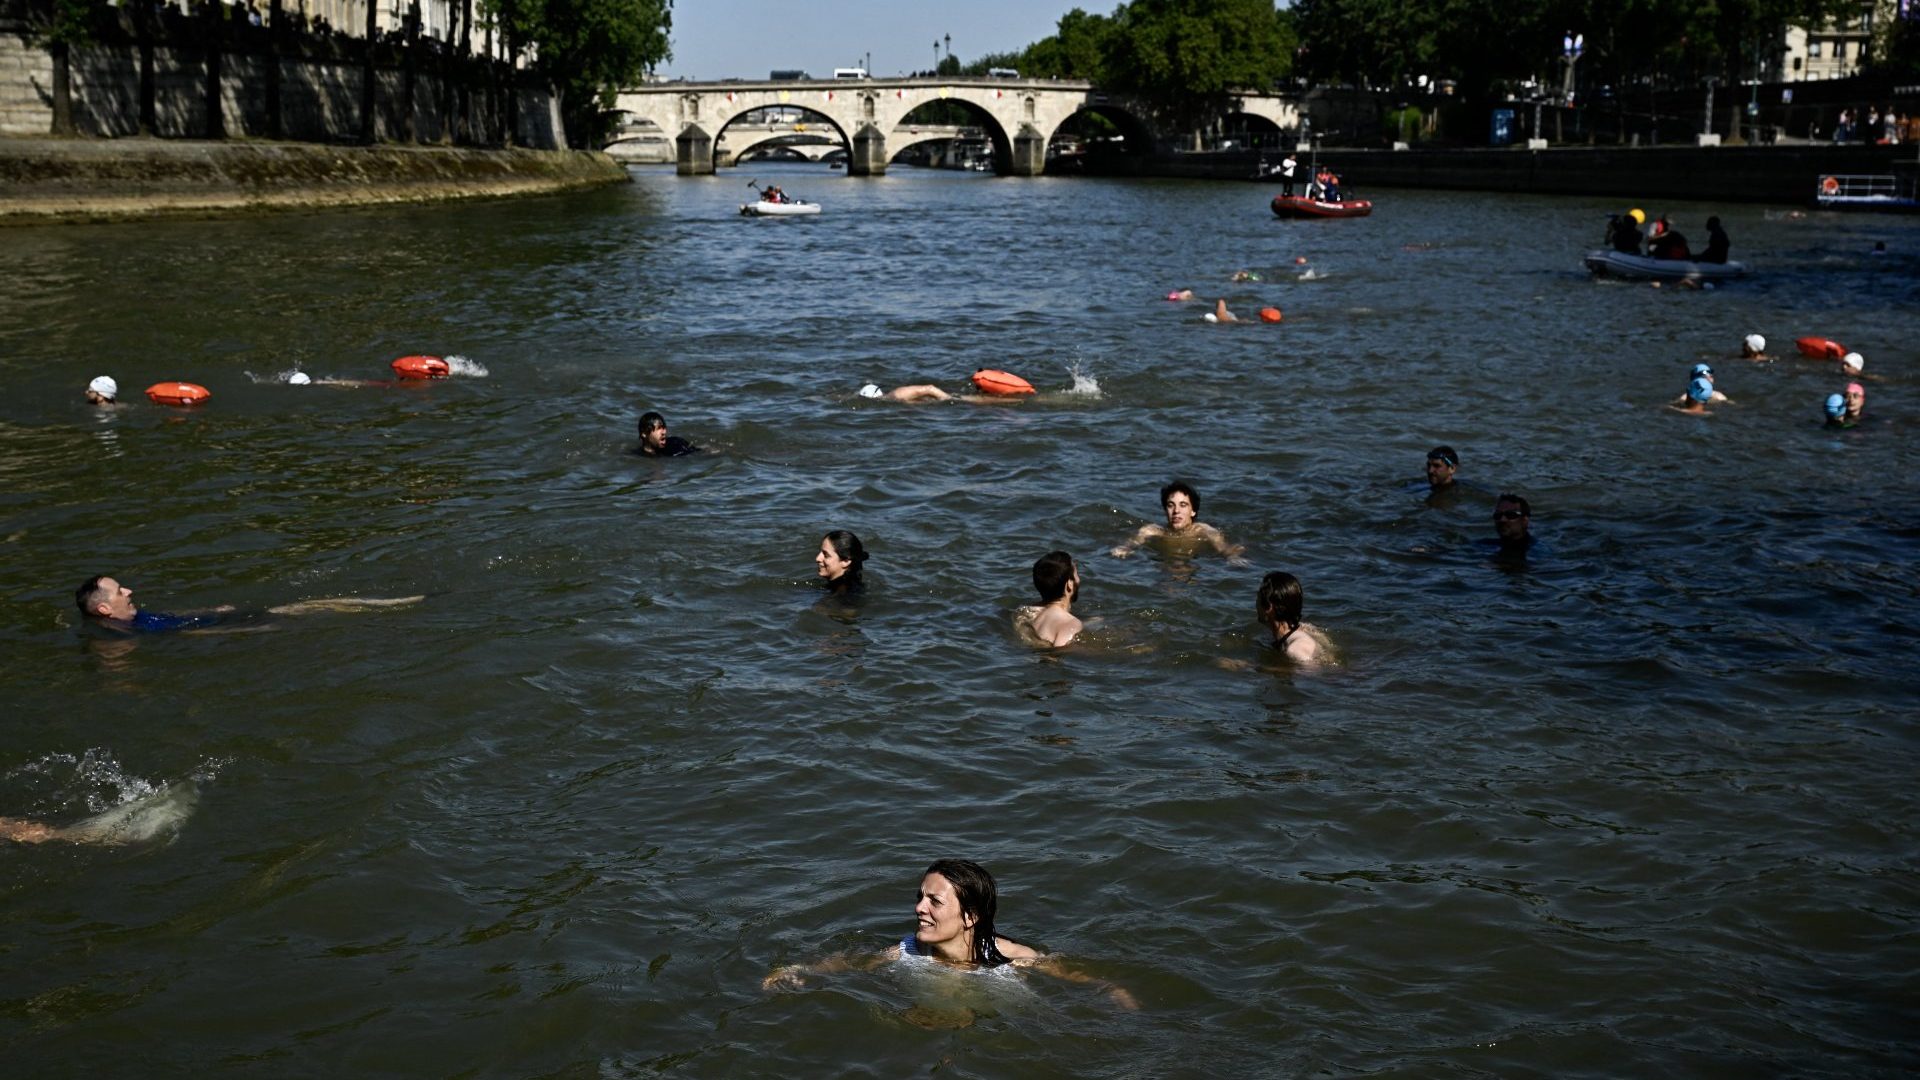 Local residents swim in the River Seine in Paris on July 17, 2024 to demonstrate that it is clean enough to host the outdoor swimming events at the Olympics. Photo: Julien de Rosa/AFP/Getty